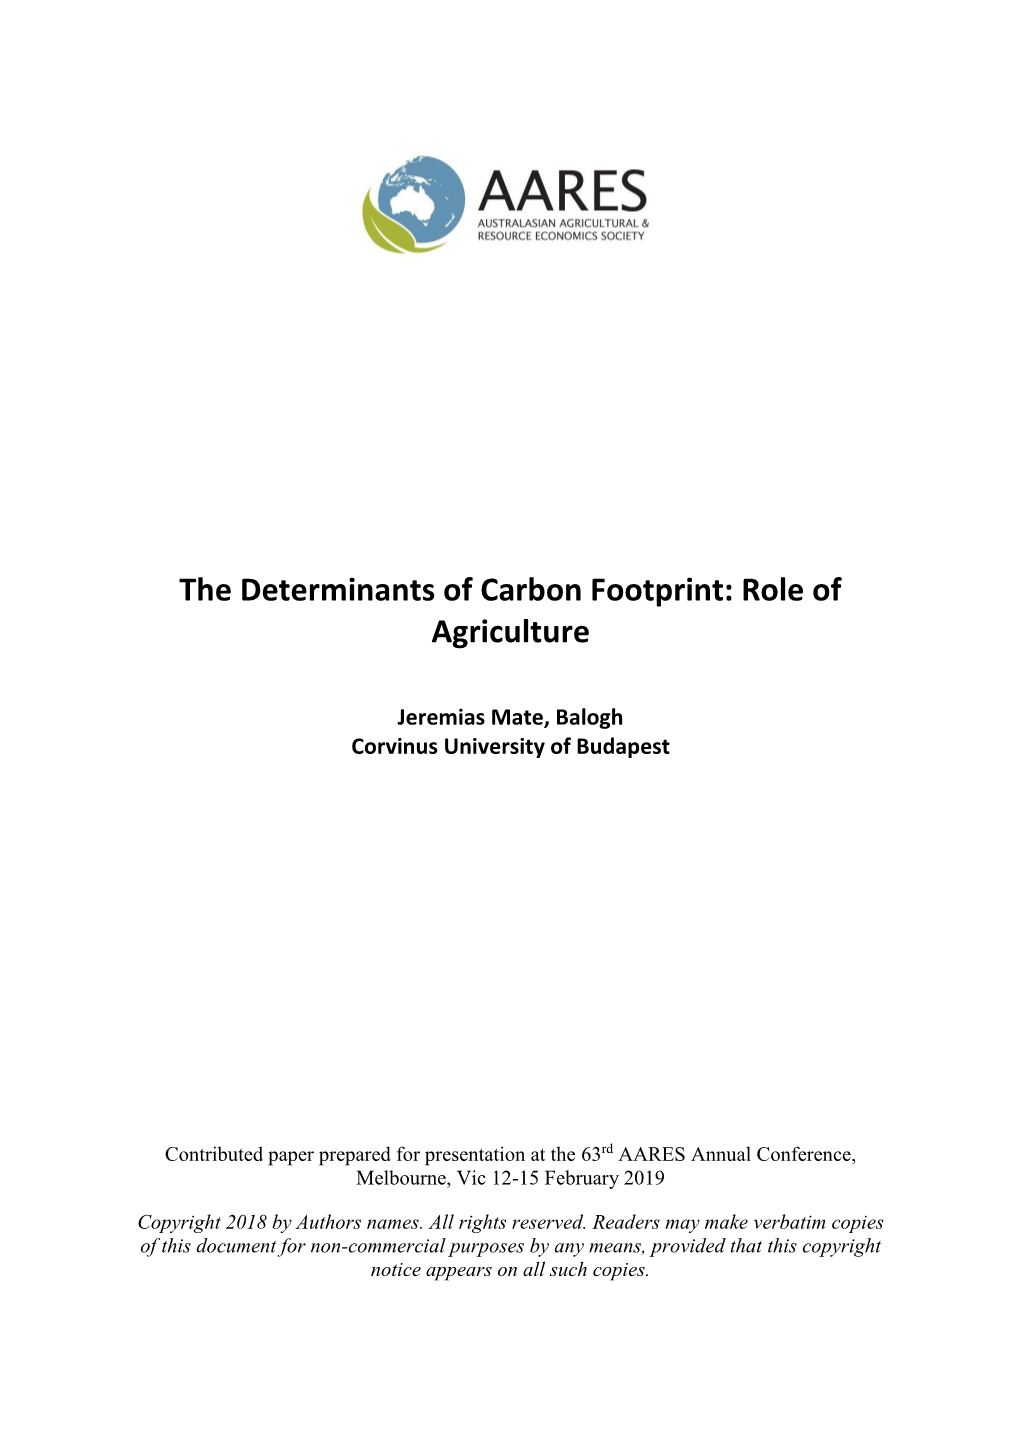 The Determinants of Carbon Footprint: Role of Agriculture